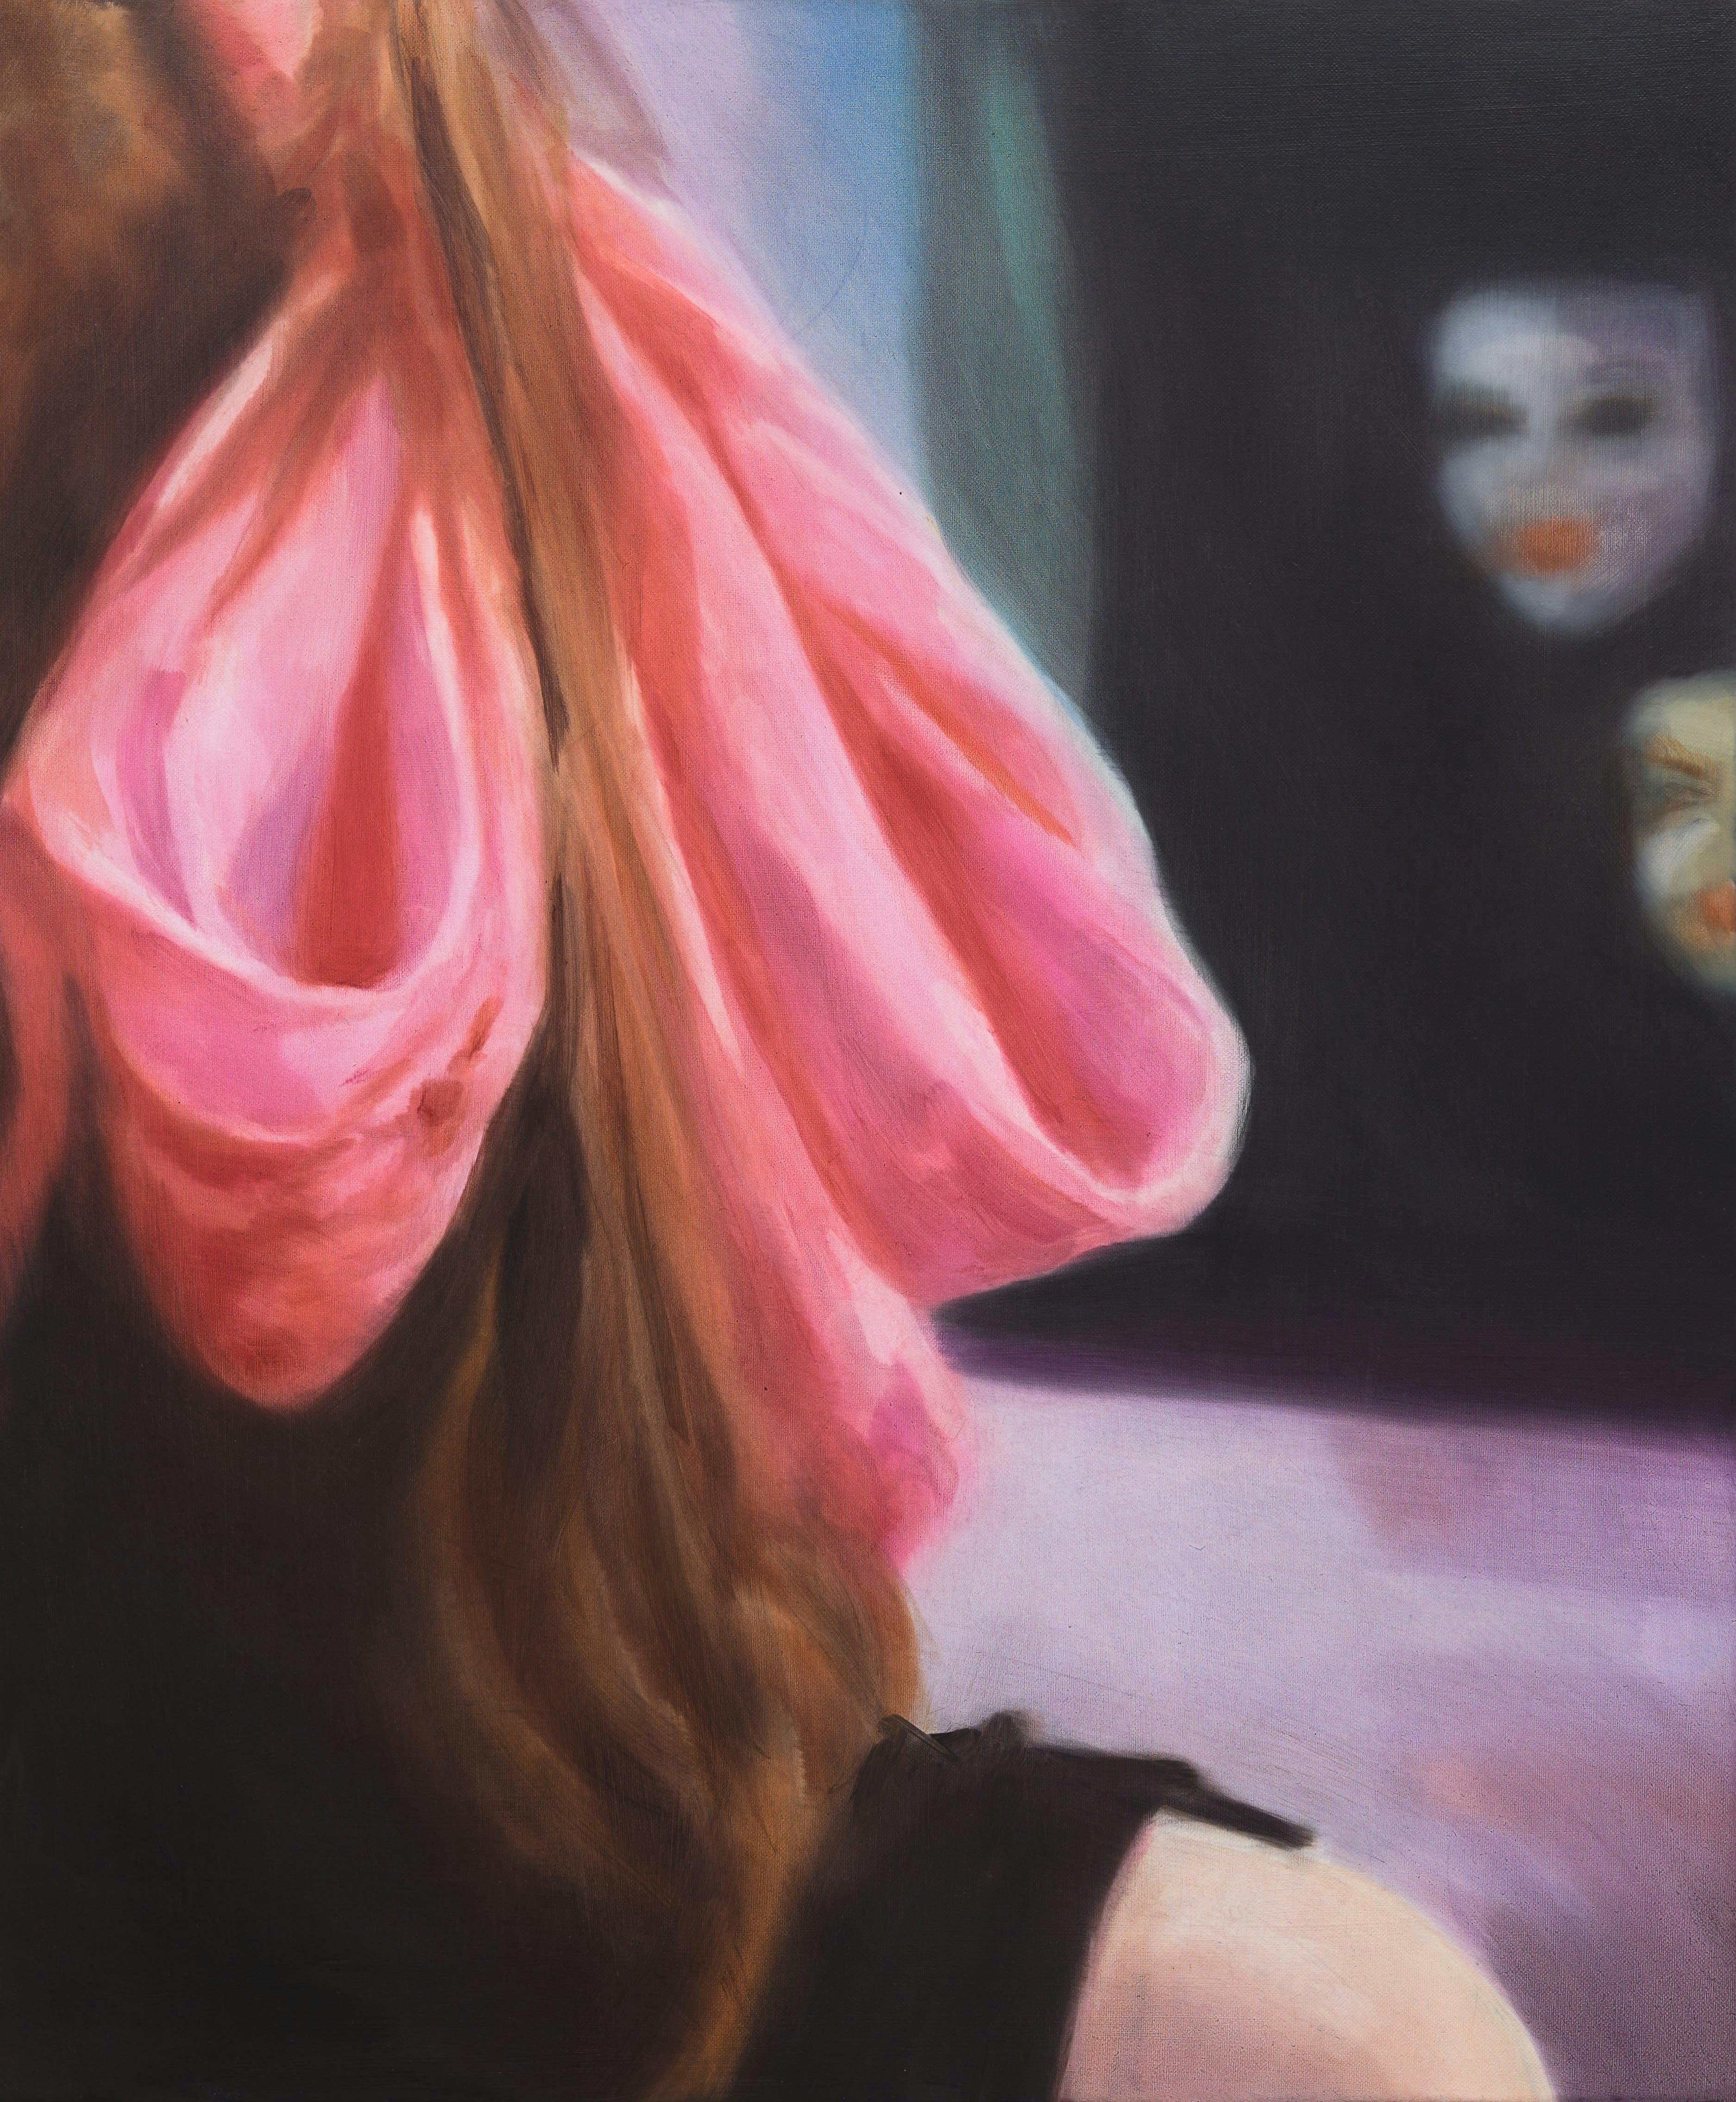 A crop of Rachel Lancaster's painting 'Pull The Strings', 2022 Oil on canvas 60 x 50 cm 23 5/8 x 19 3/4 in. A large pink bow in the hair of a female figure. We see two masks facing us. 